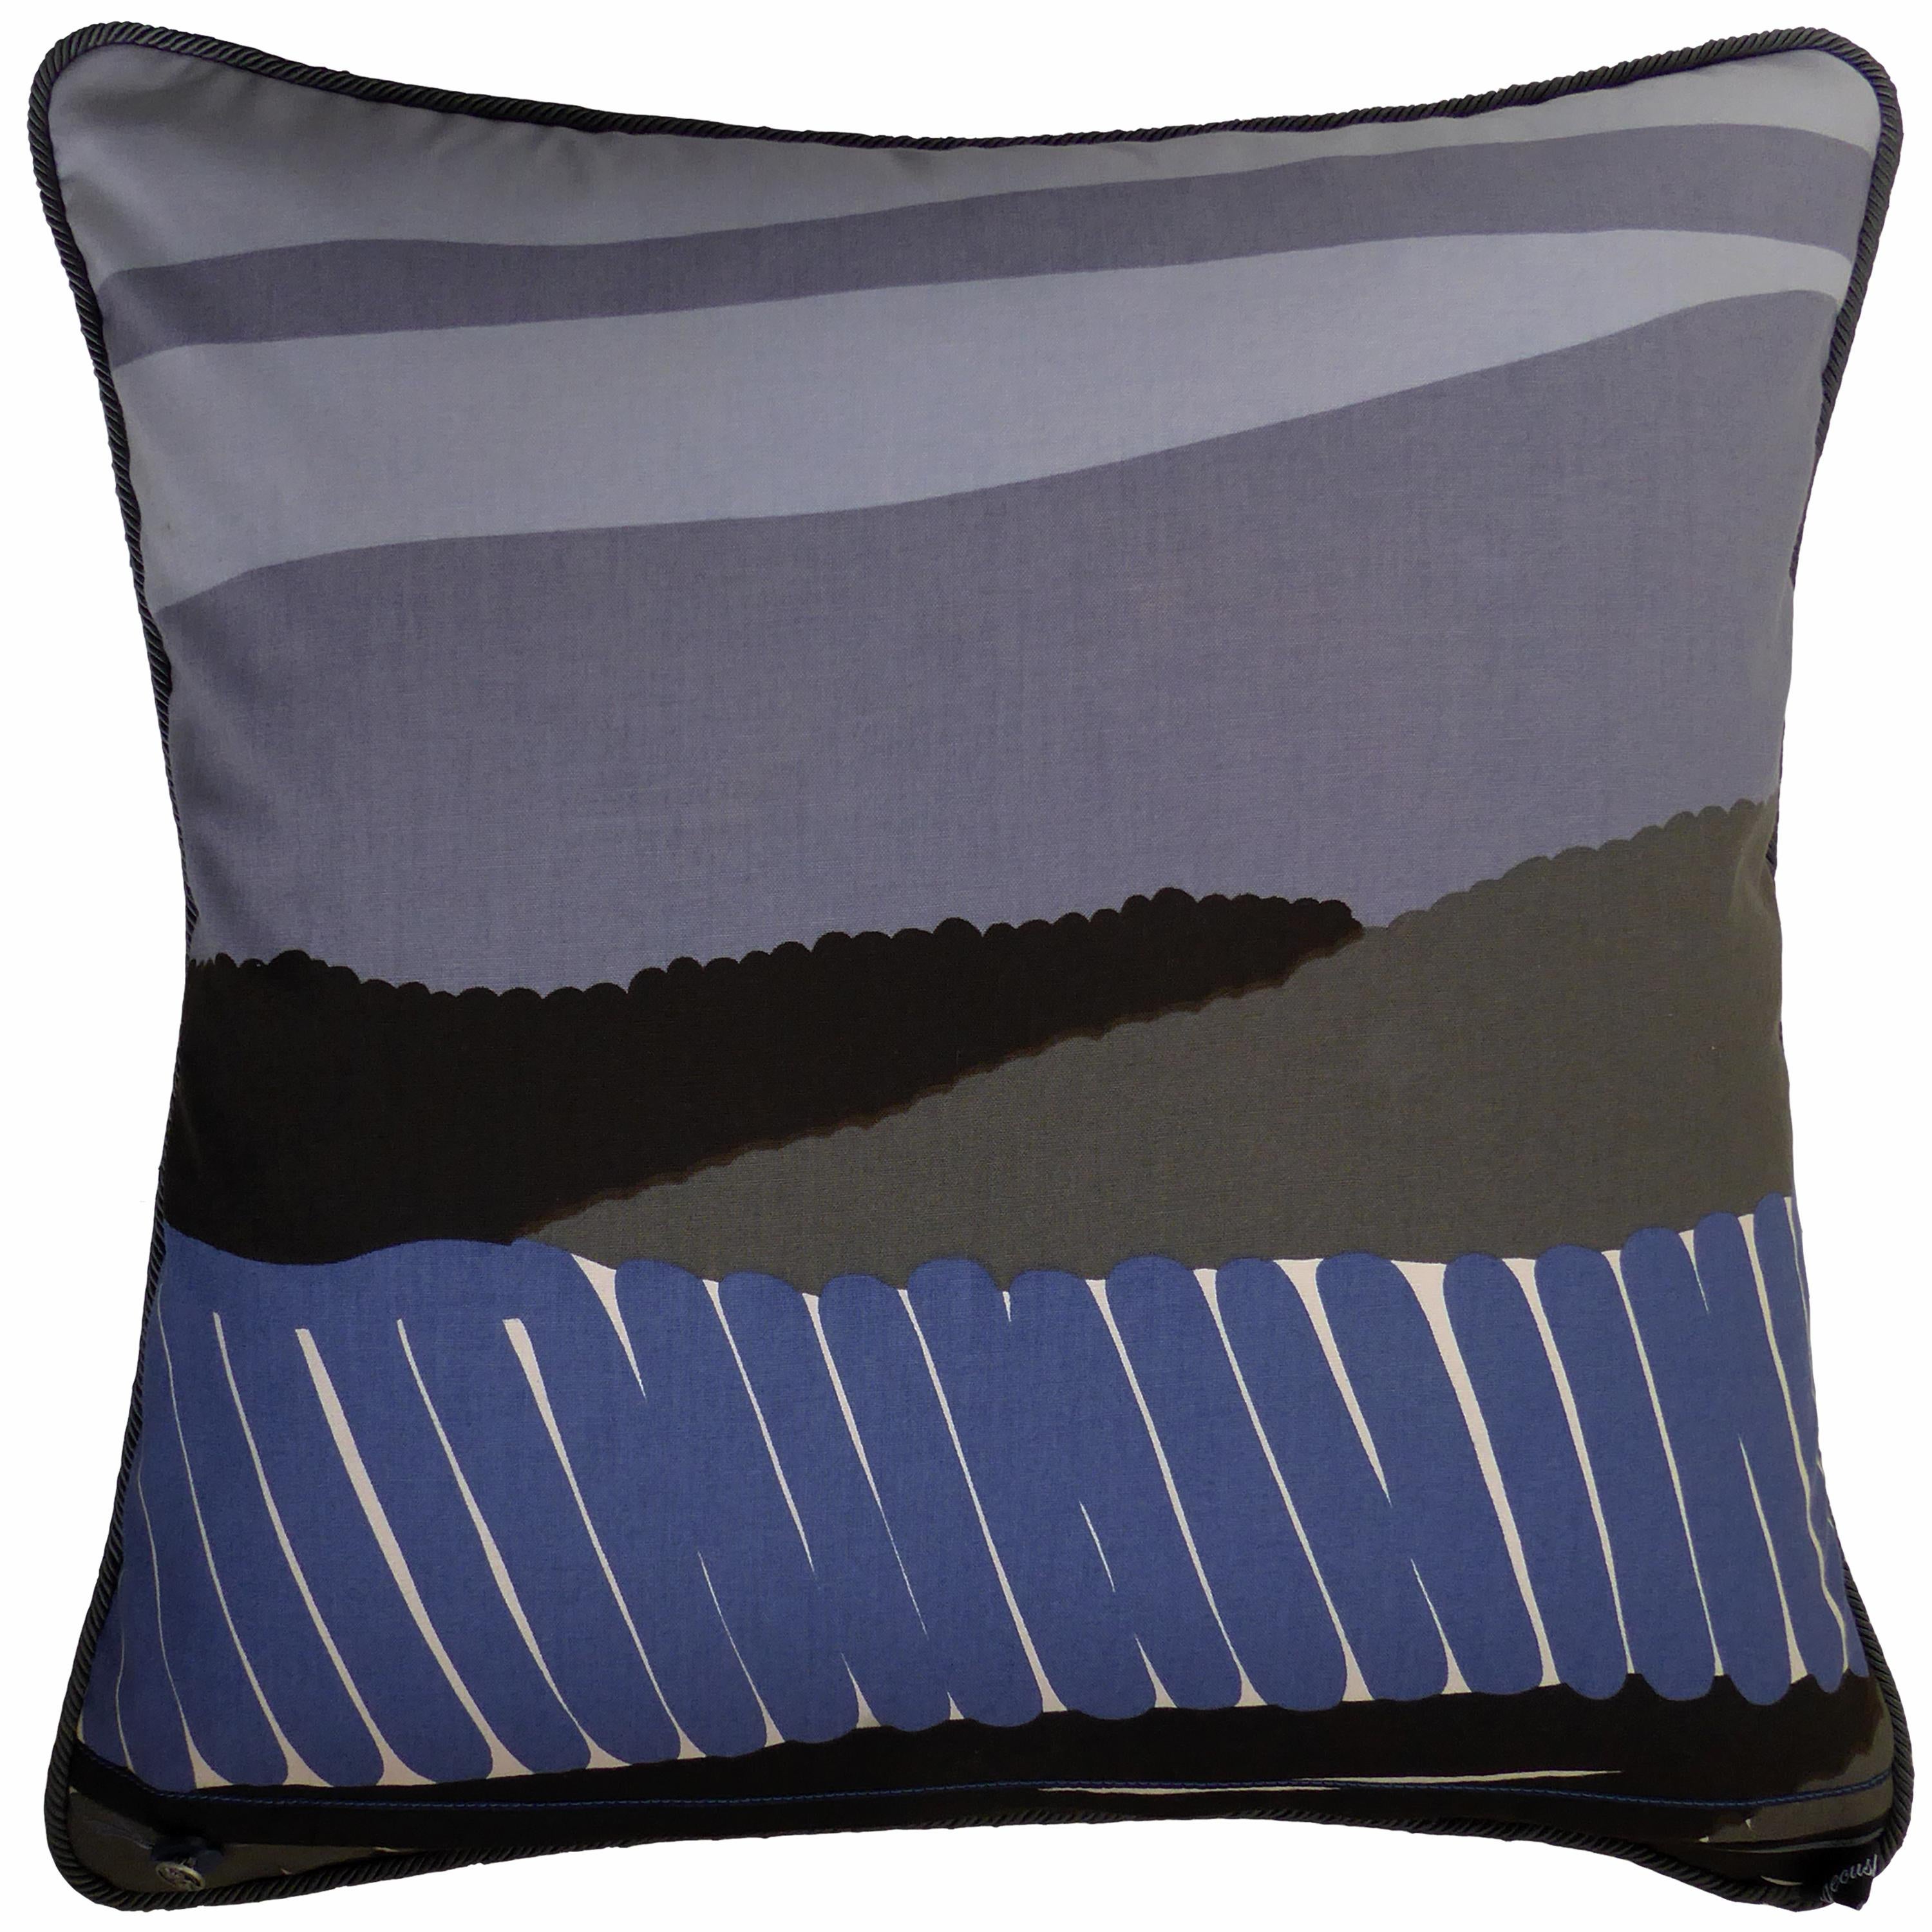 Verner
circa - 1970
British bespoke-made luxury pillow created in original Scandinavian cotton furnishing fabric featuring an abstract landscape design
Provenance: Sweden
Made by Nichollette Yardley-Moore
Cotton furnishing fabric with full cotton